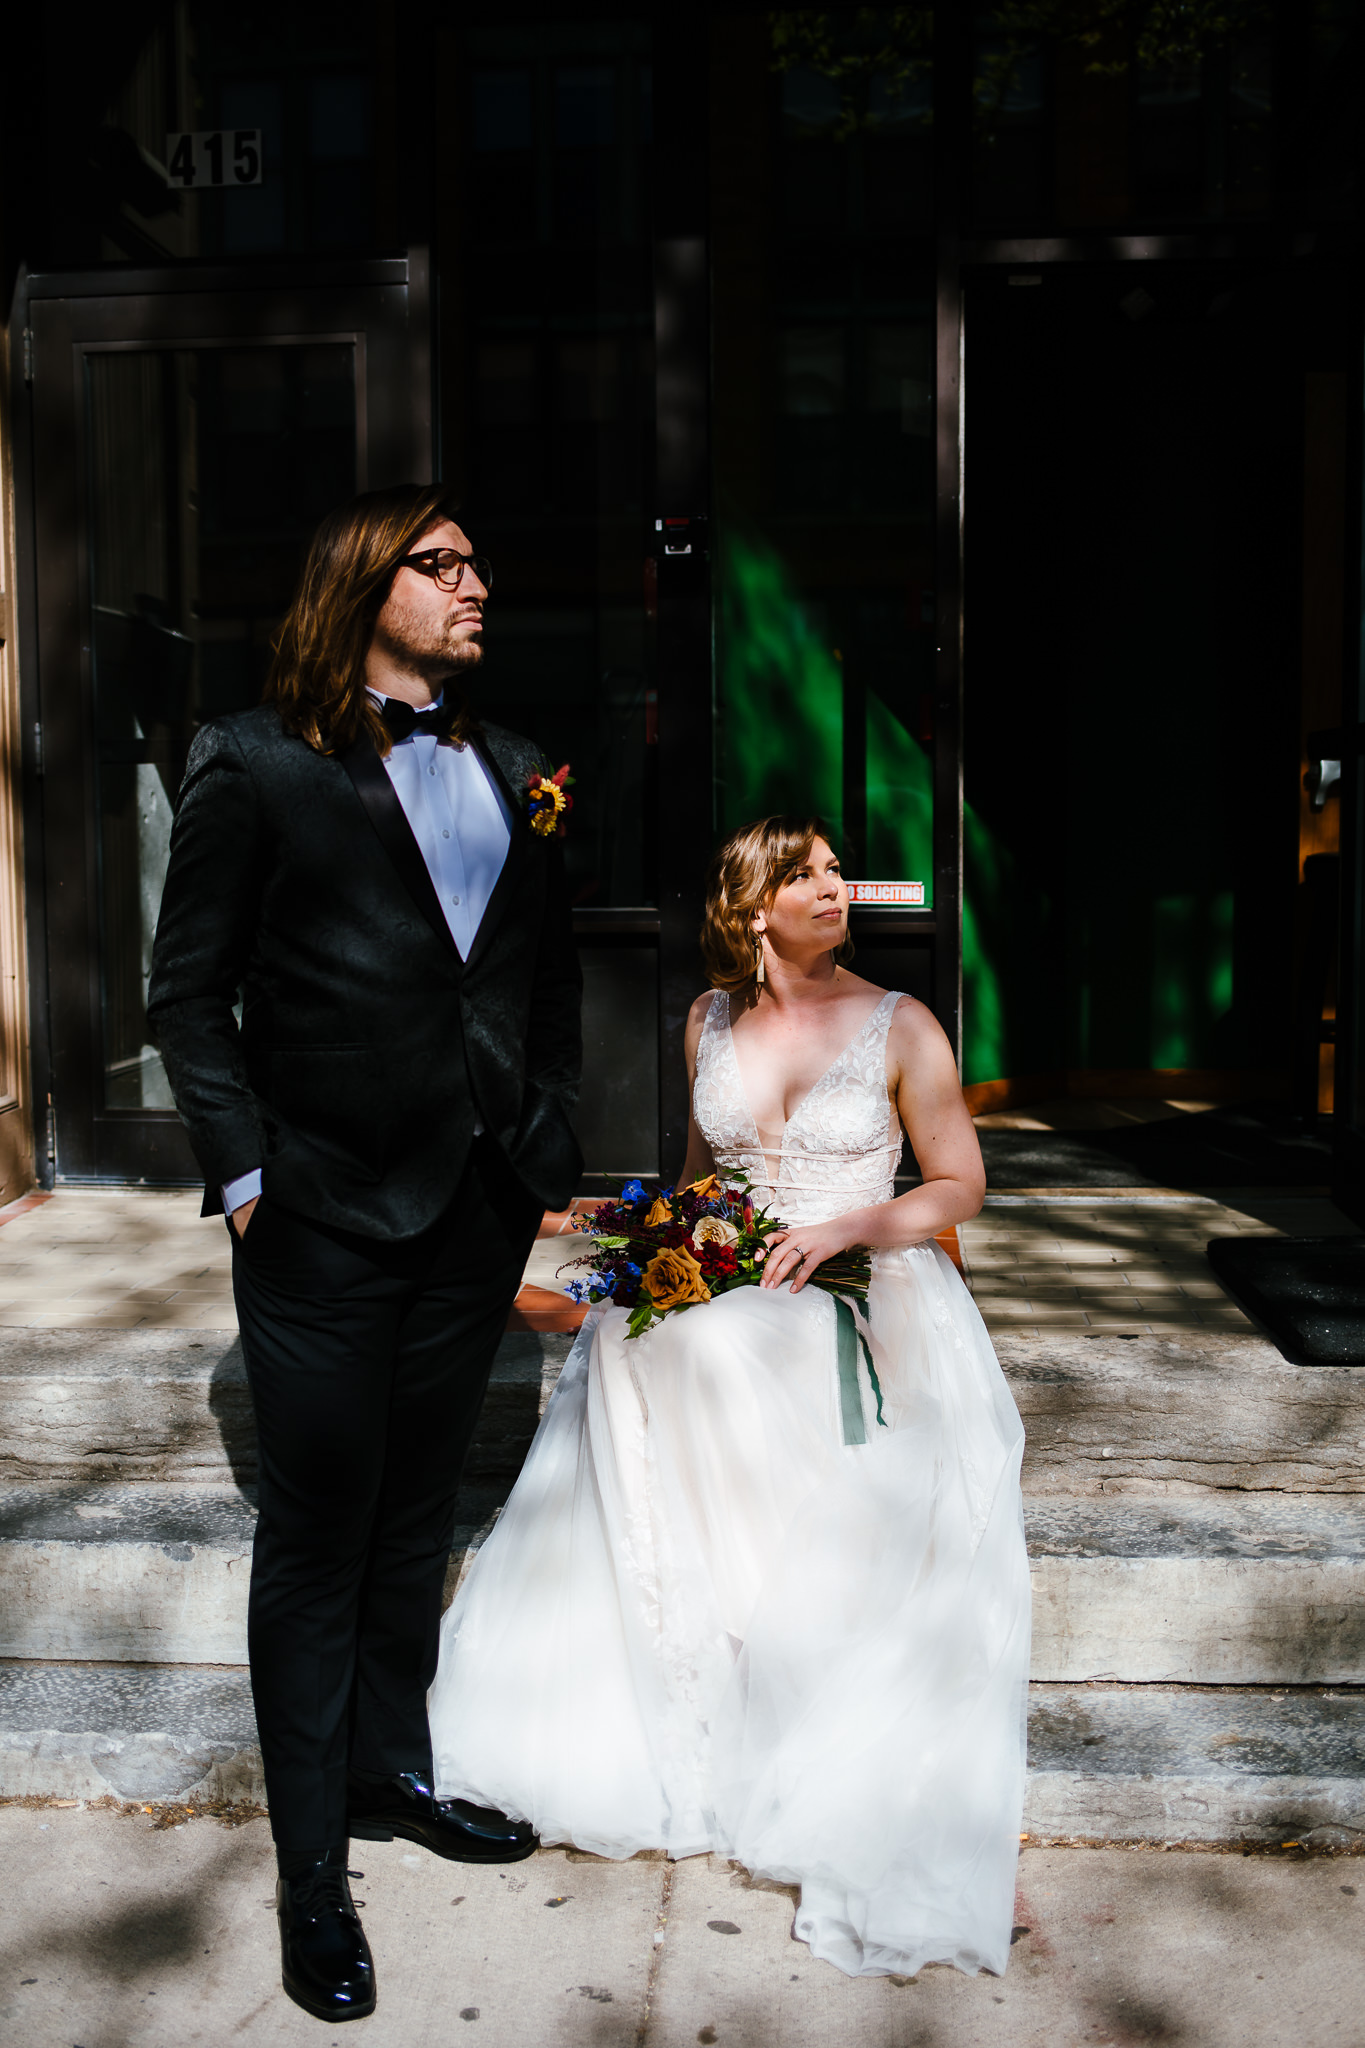 Artsy photos of the bride and groom in front of a building.